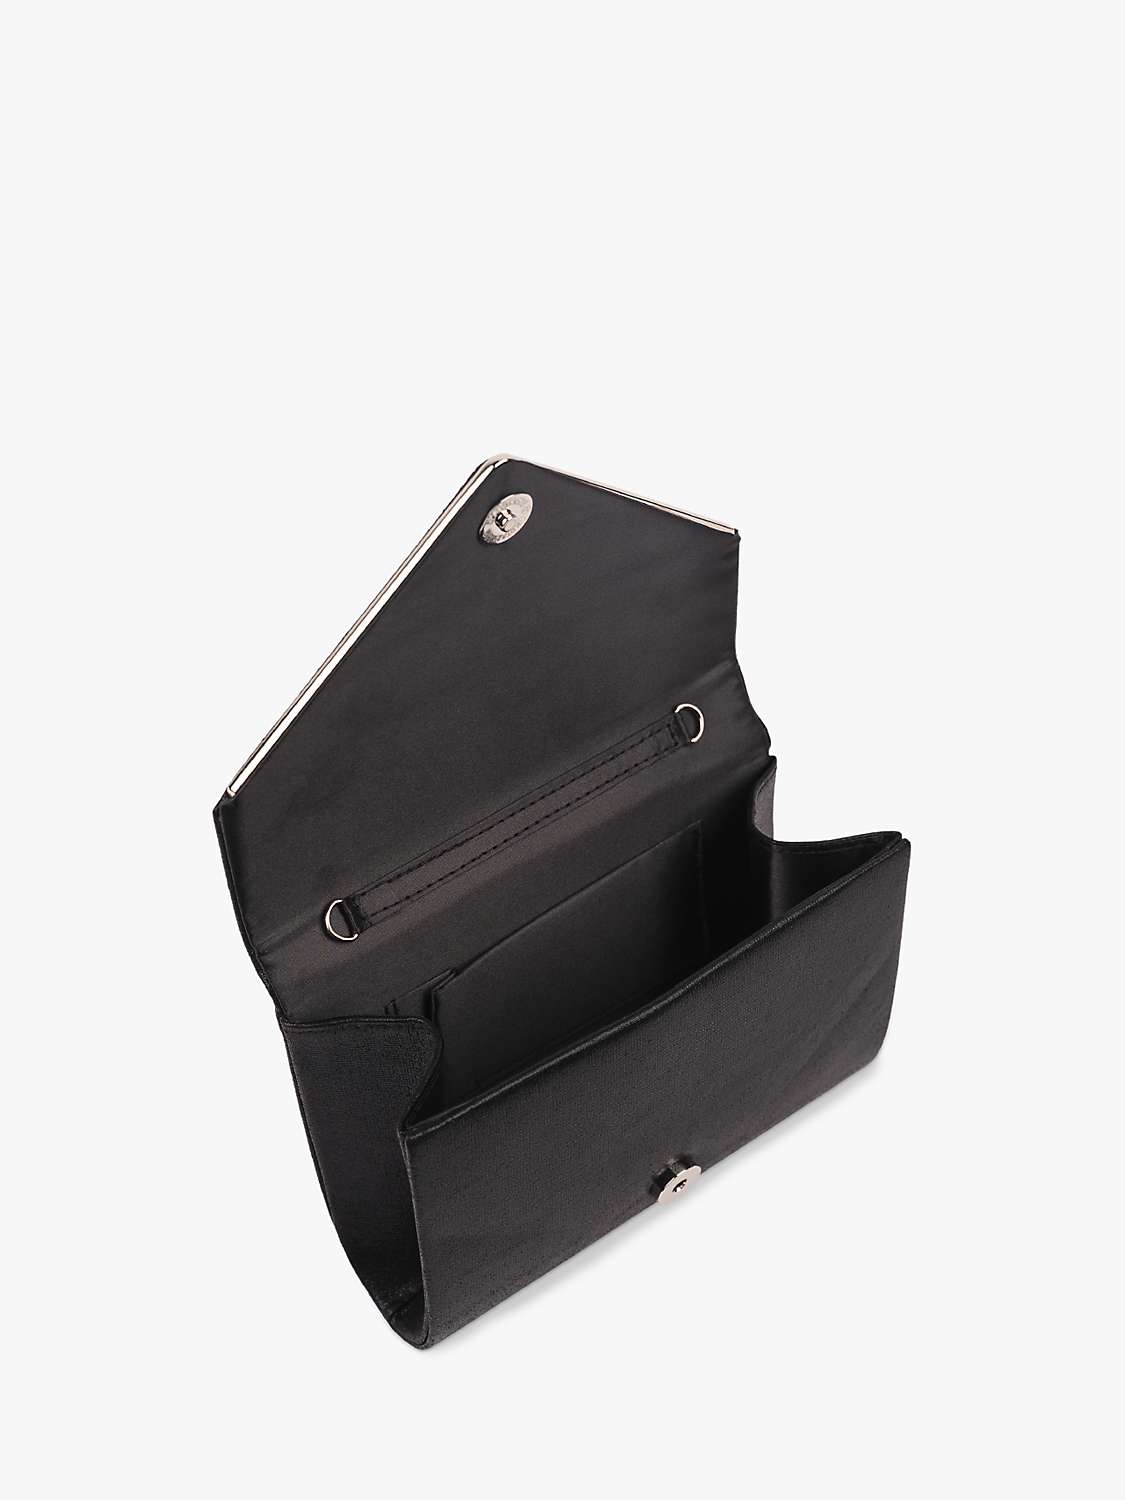 Buy Paradox London Darcy Simmer Clutch Bag Online at johnlewis.com